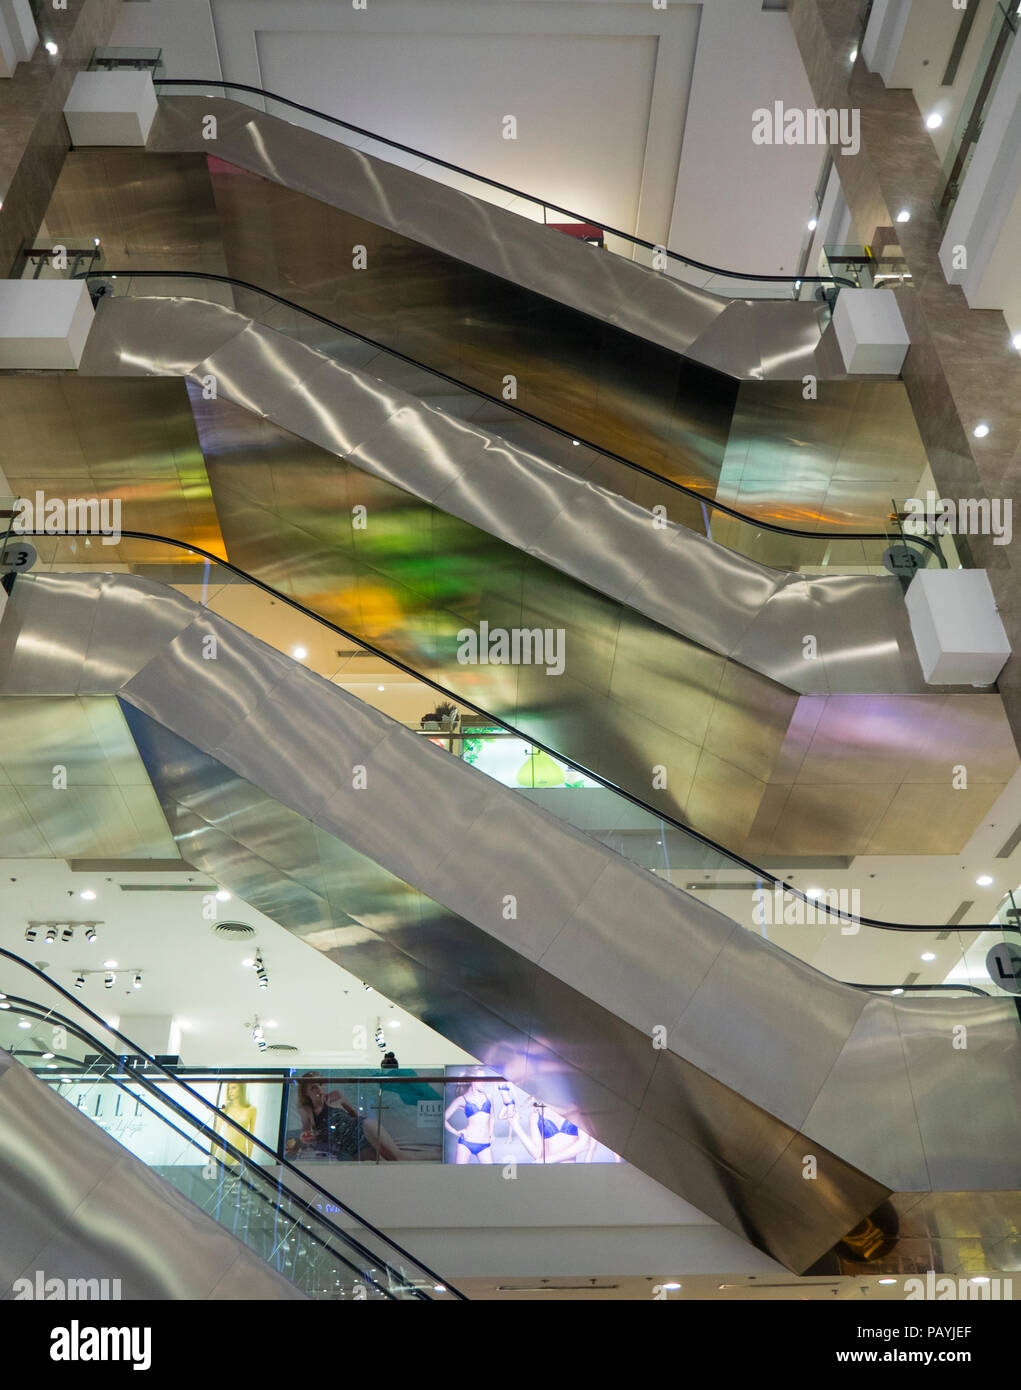 Stainless steel escalators  in a shopping centre in Ho Chi Minh City, Vietnam. Stock Photo